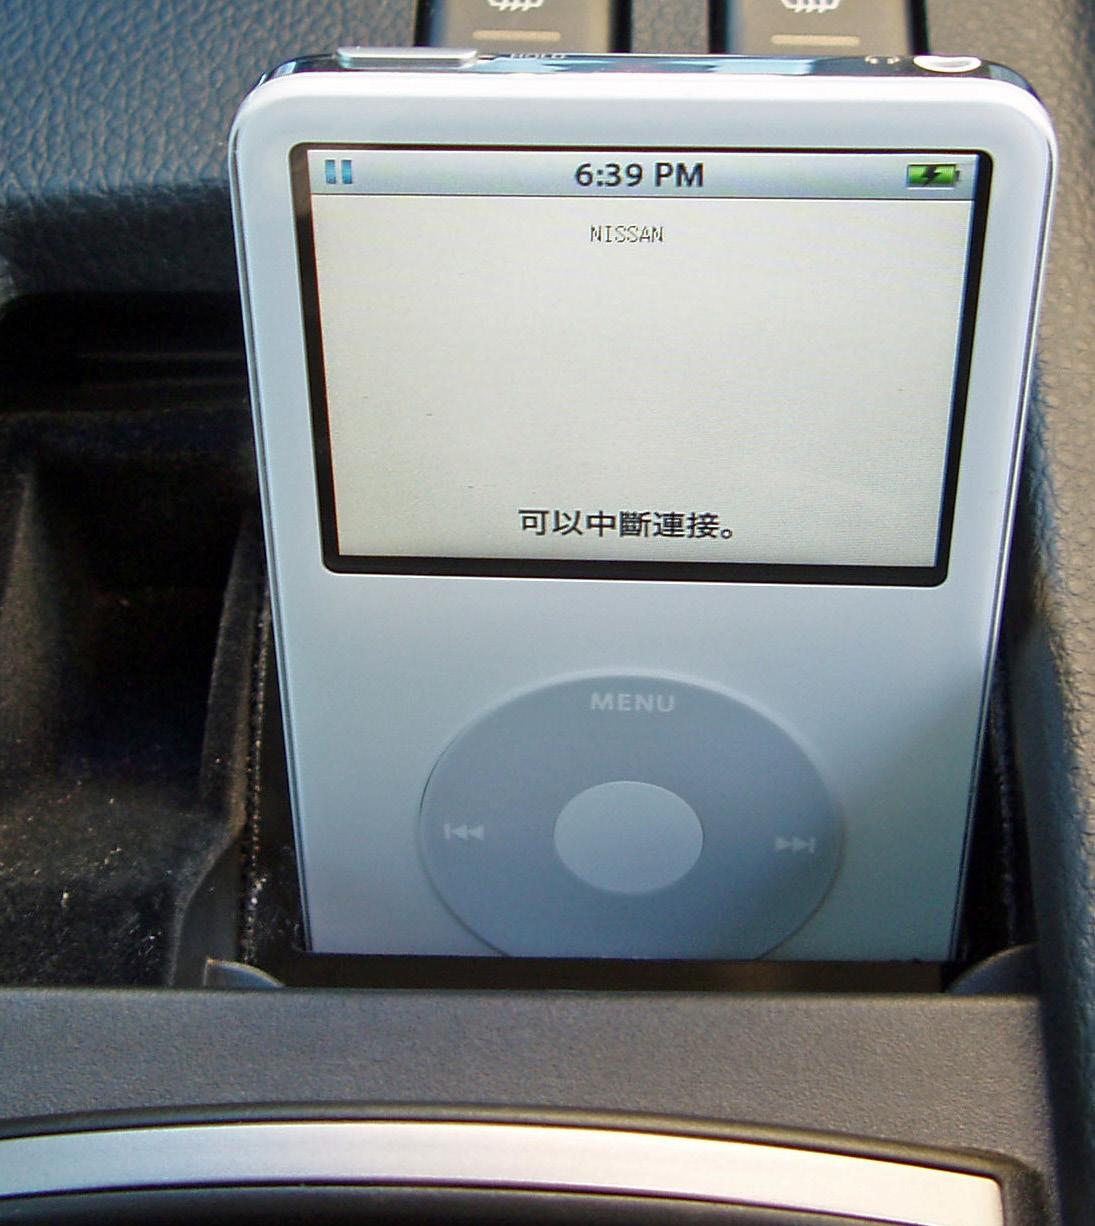 download the last version for ipod Auto Window Manager